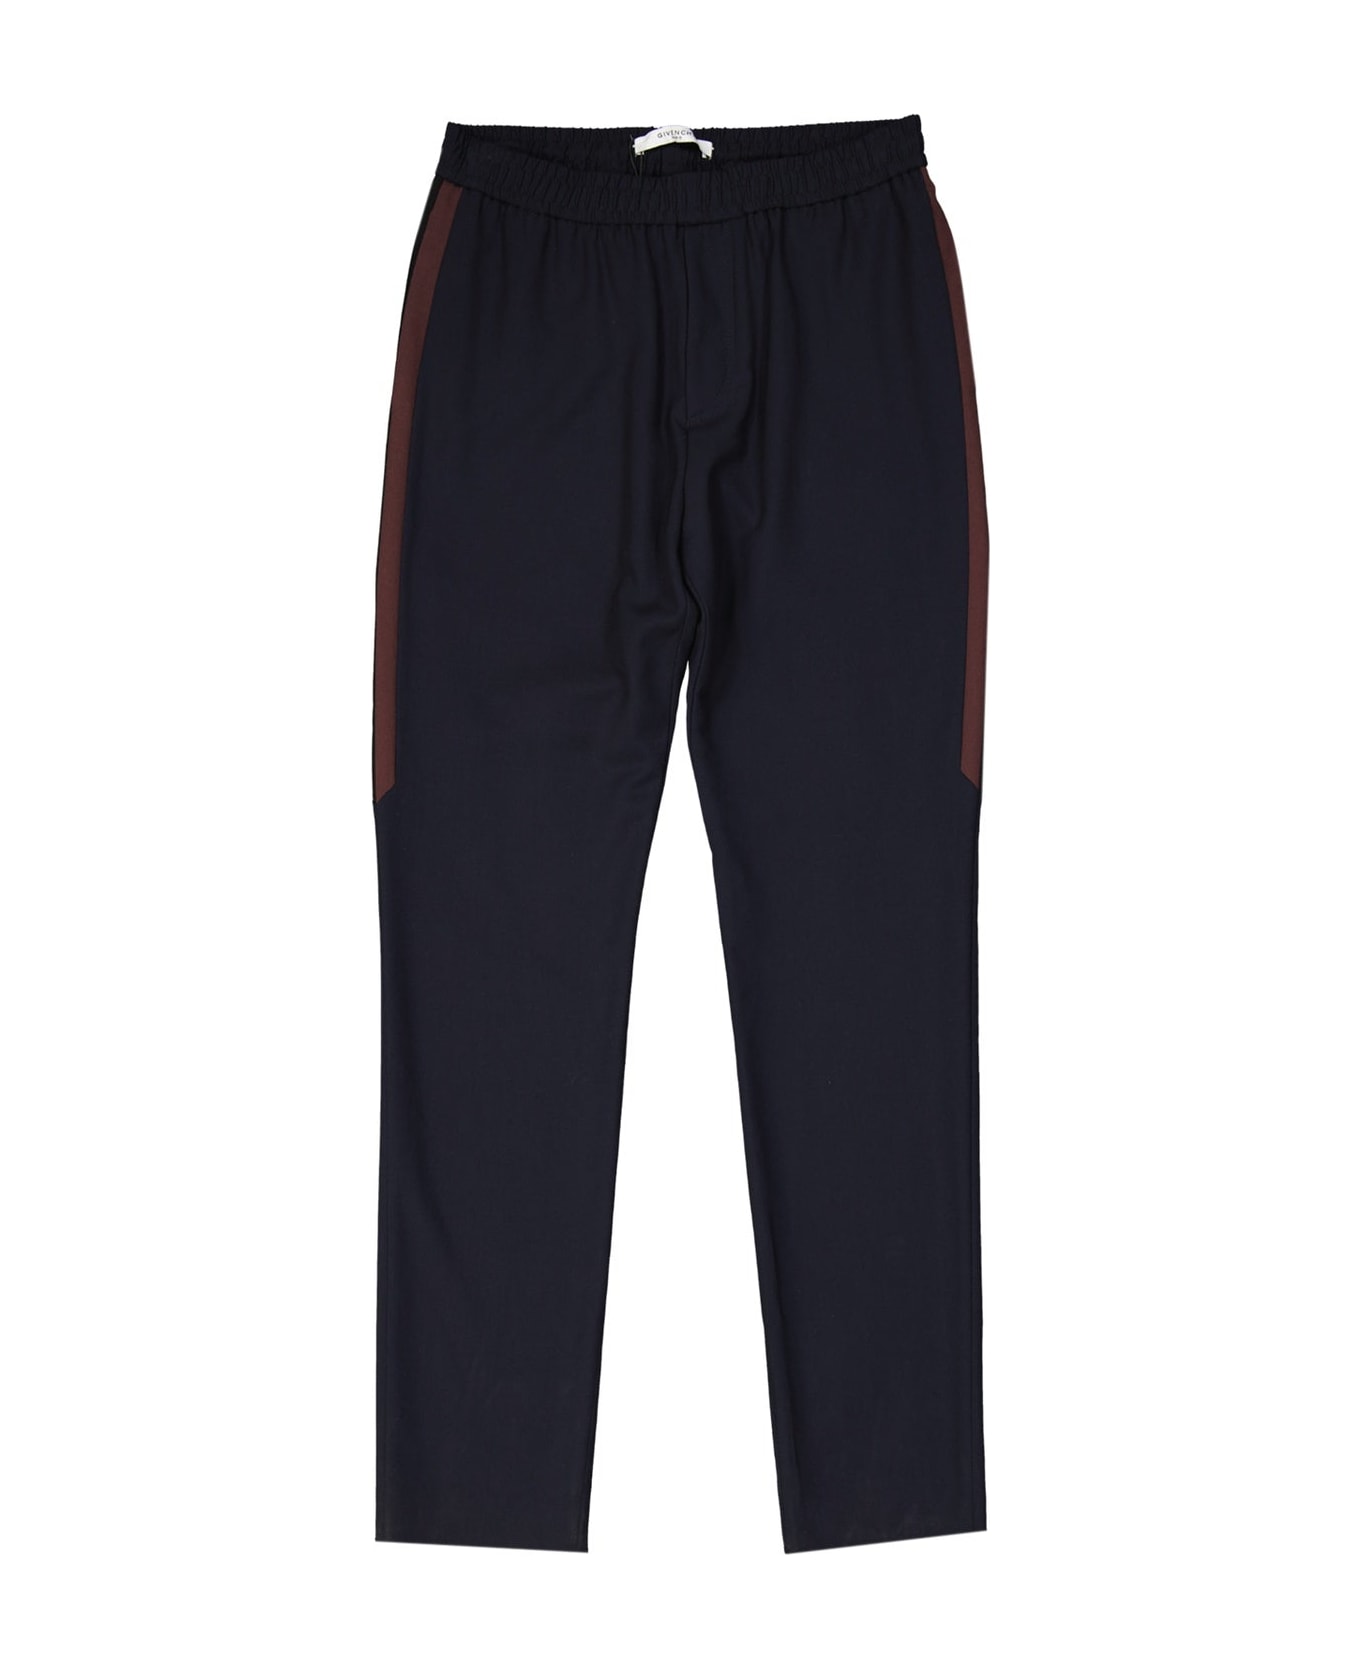 Givenchy Striped Side Panel Wool Trousers - Blue ボトムス